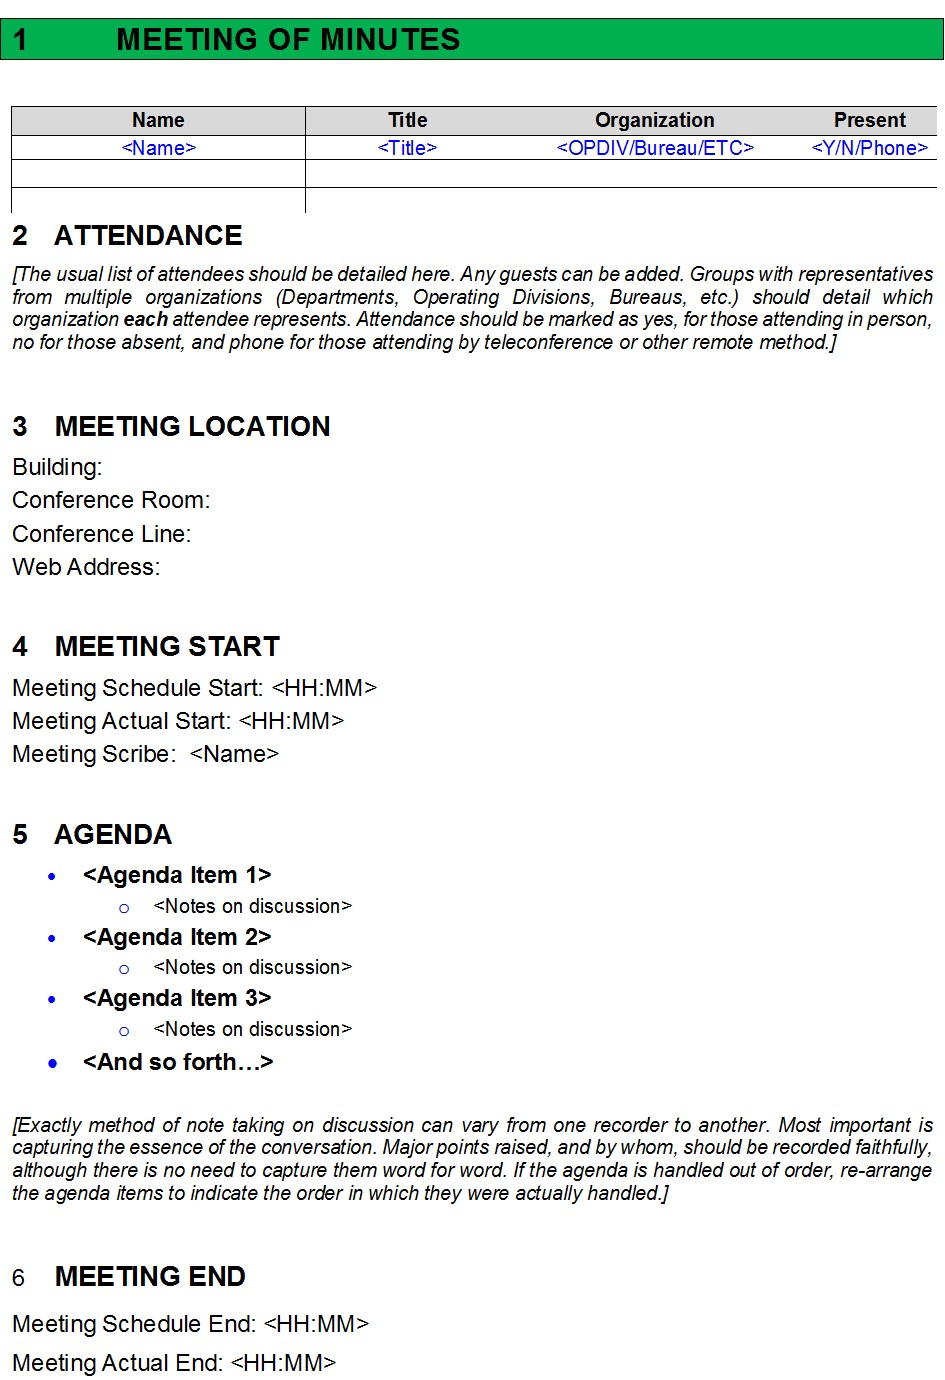 Meeting Minutes Report Template - Free Report Templates